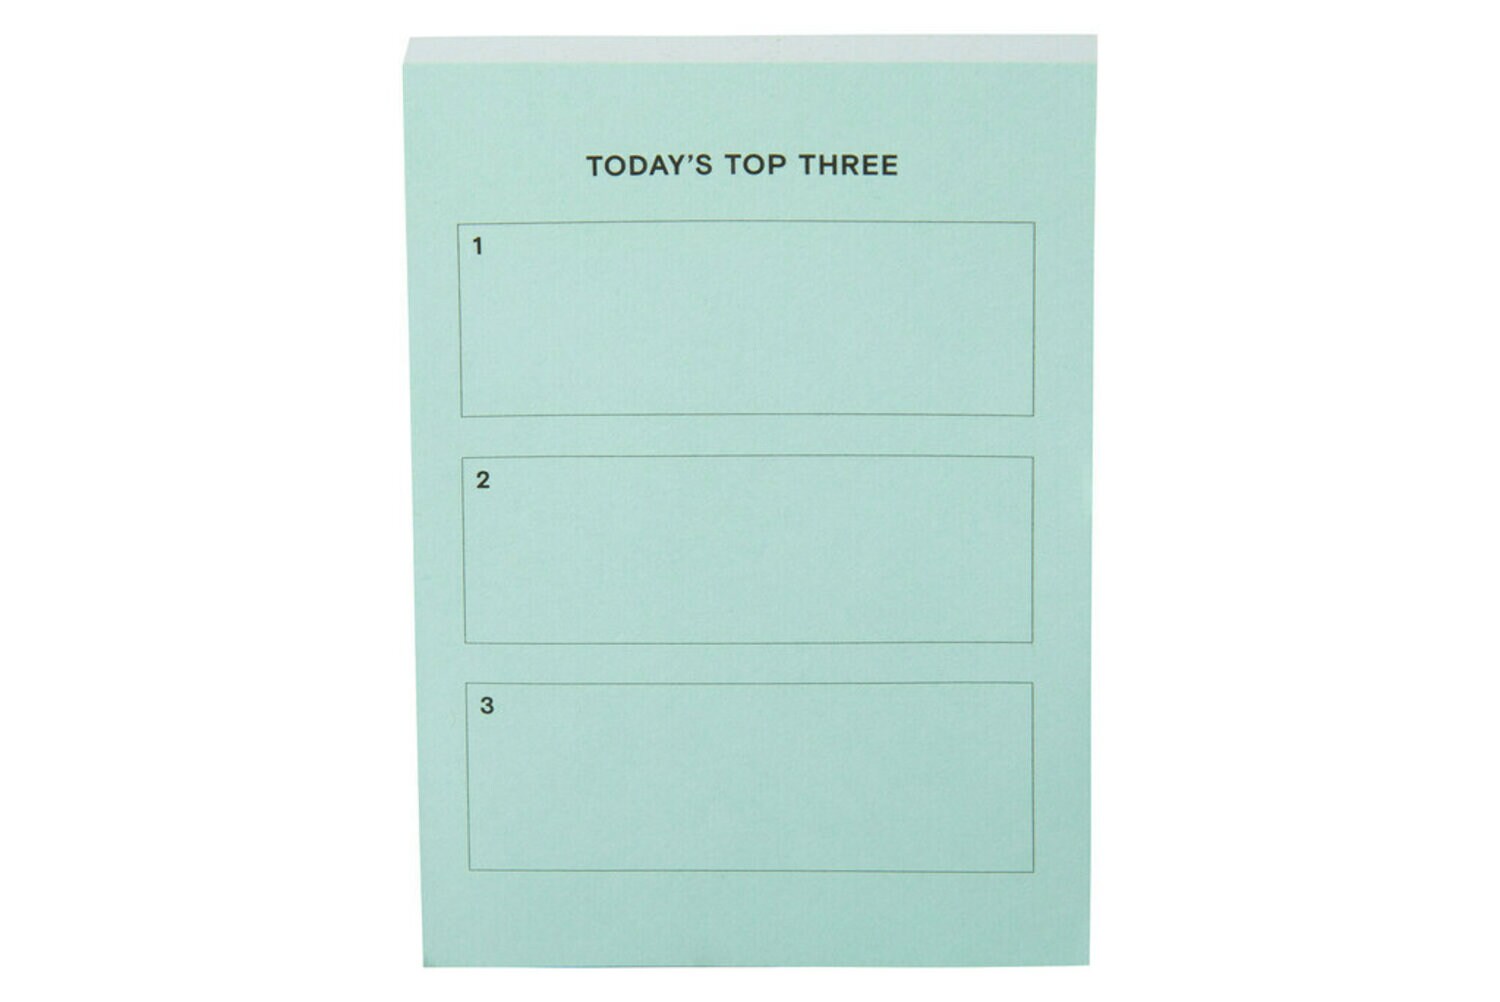  Post-it Tabs.625 in Solid, Aqua, Yellow, Pink, Violet,  10/Color, 40/Dispenser (676-AYPV) , Bright Colors , 5/8 x 1-1/2 in : Office  Products